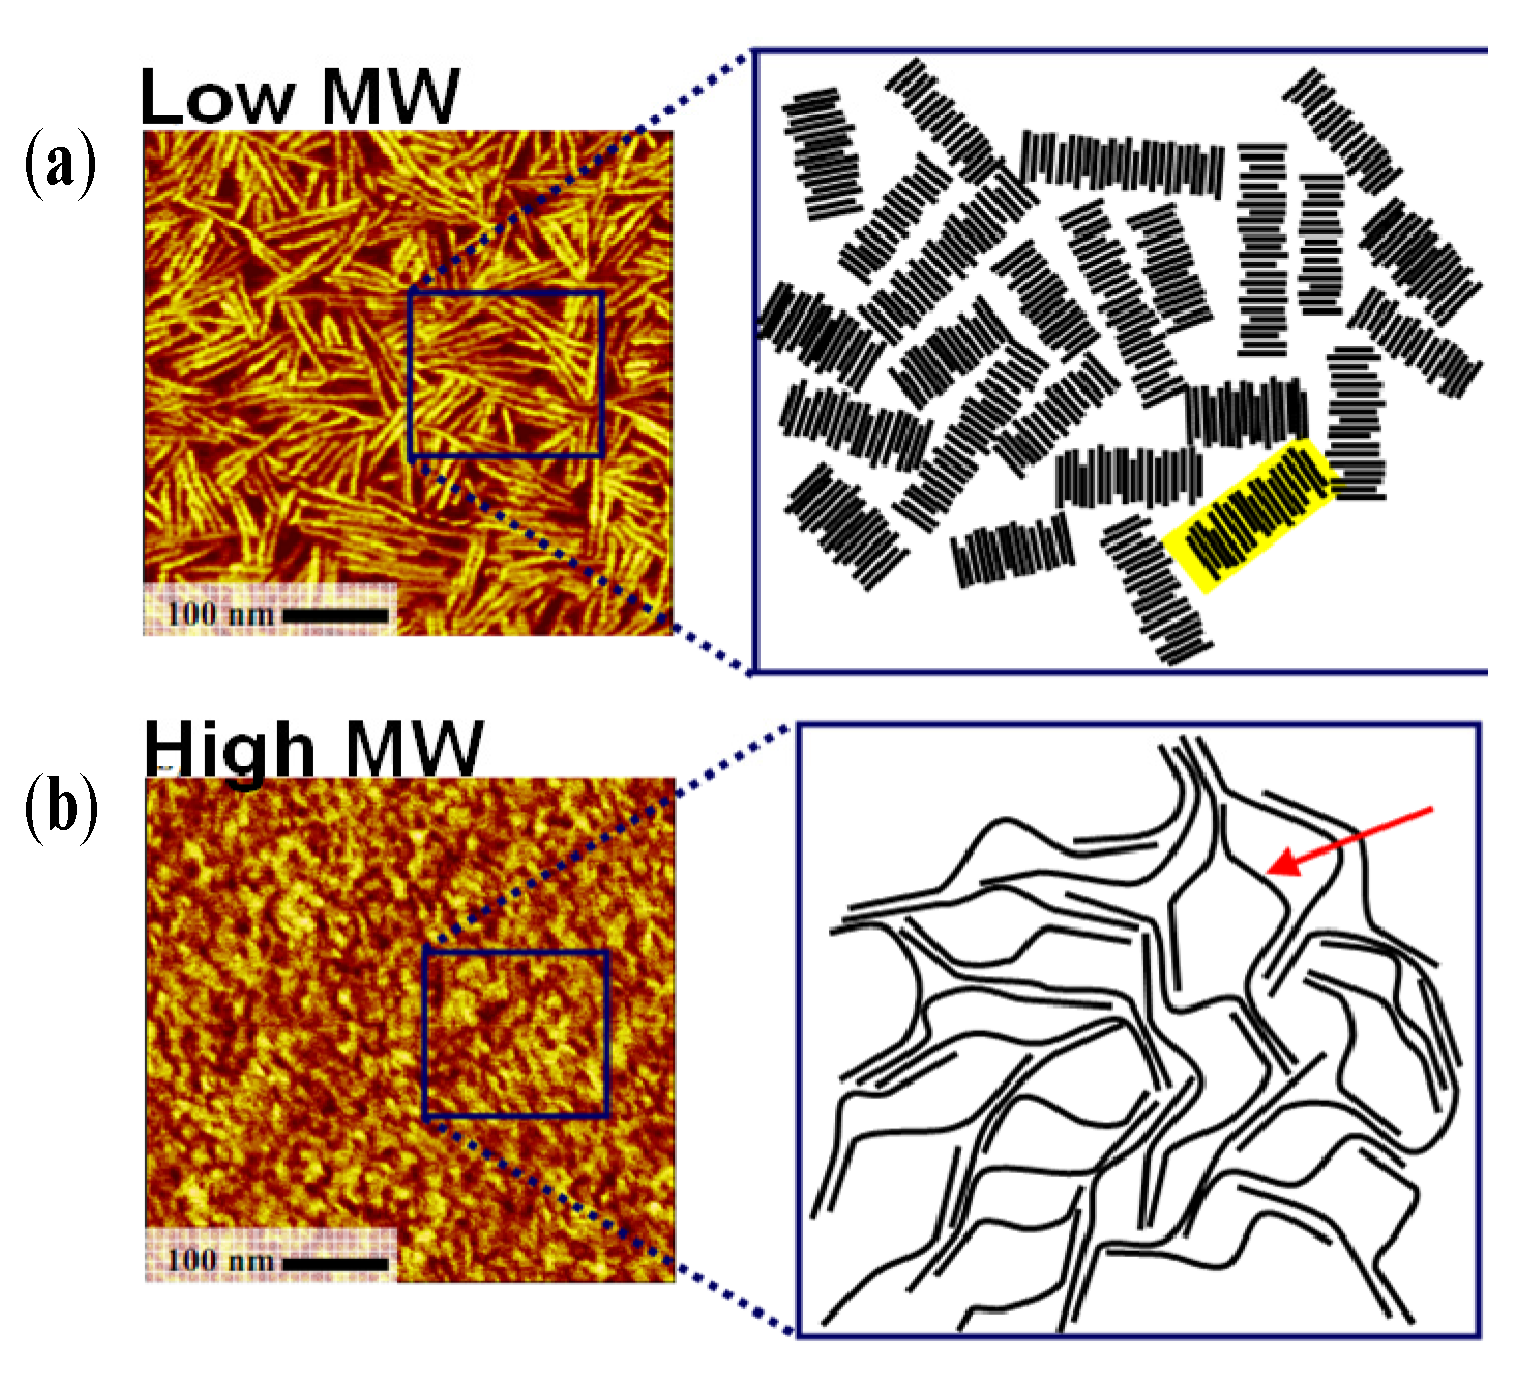 Controlling morphology and microstructure of conjugated polymers